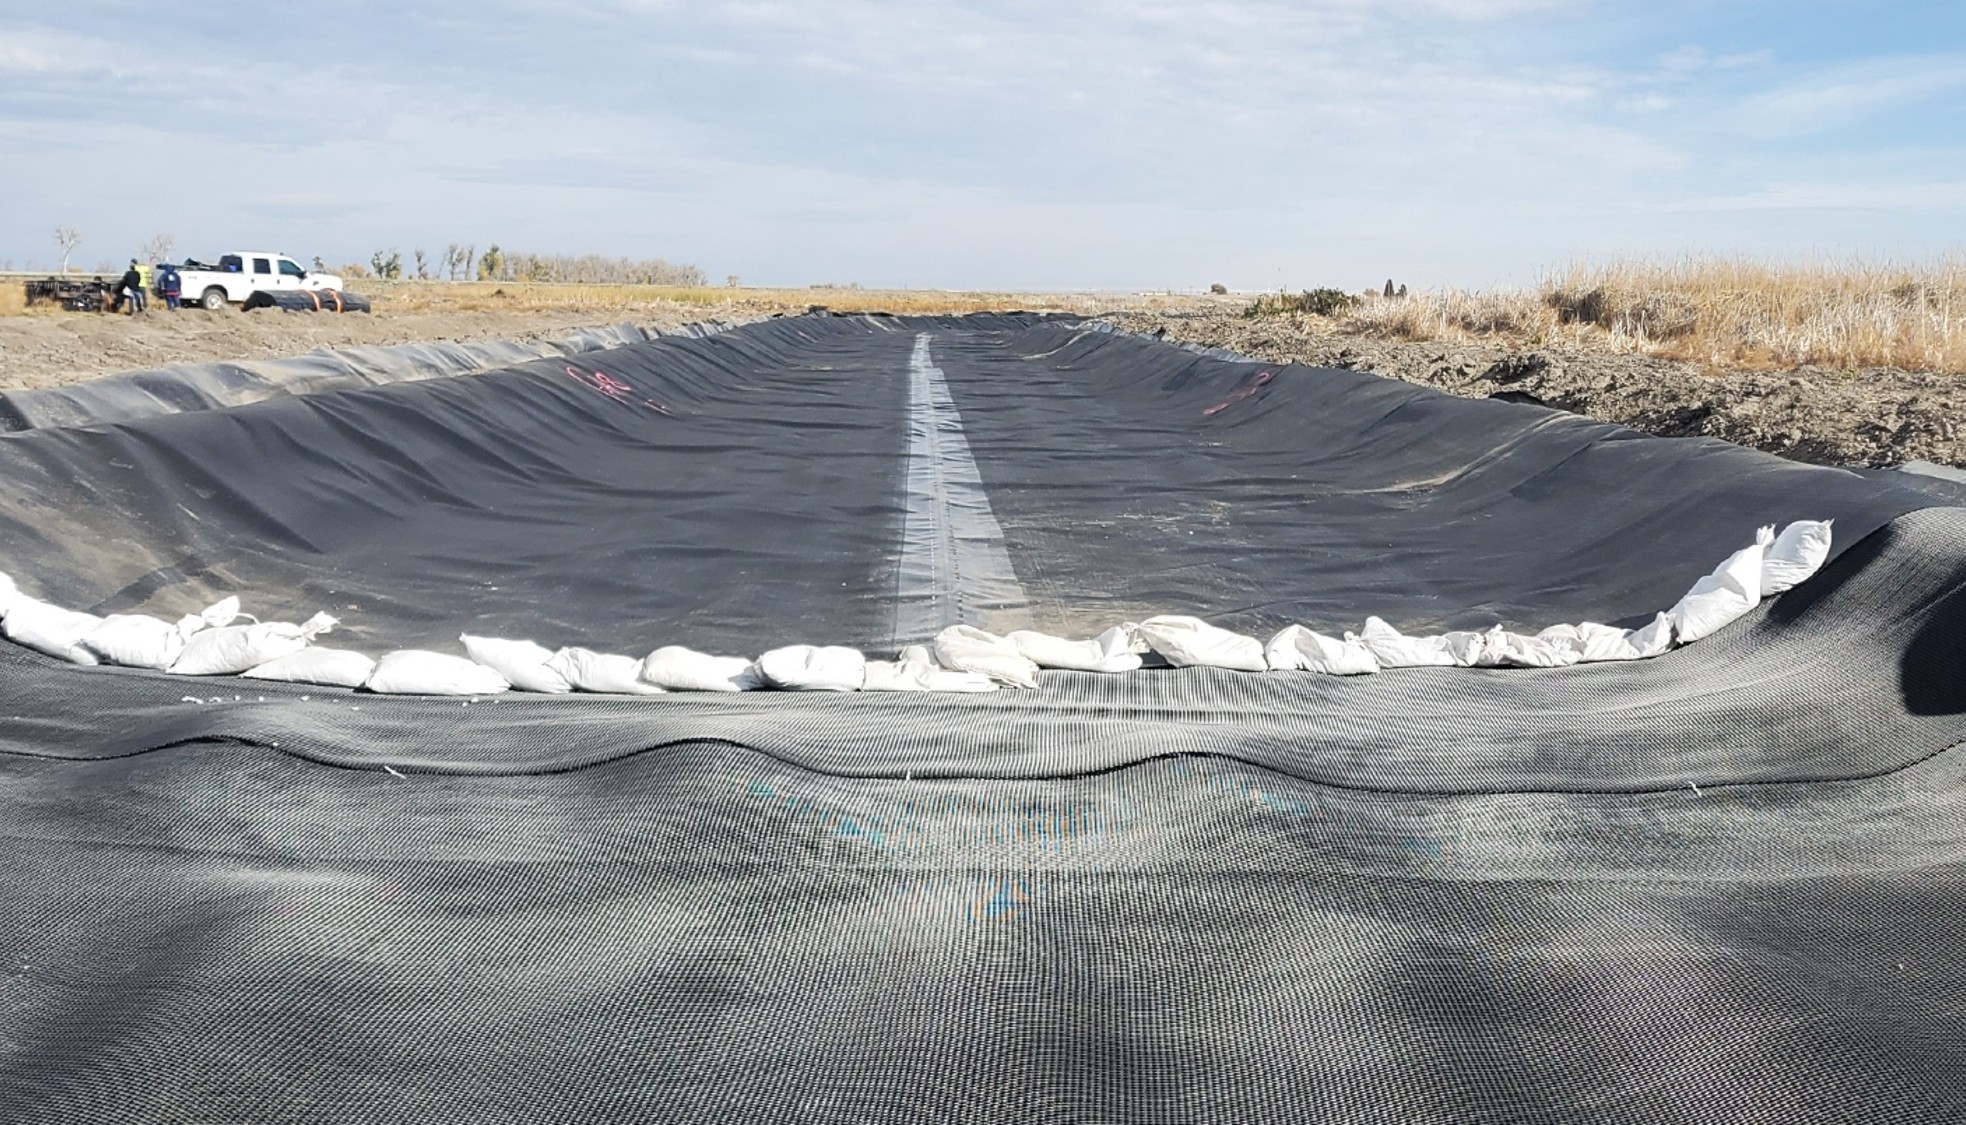 Black impervious lining covers shallow path through a dry landscape.